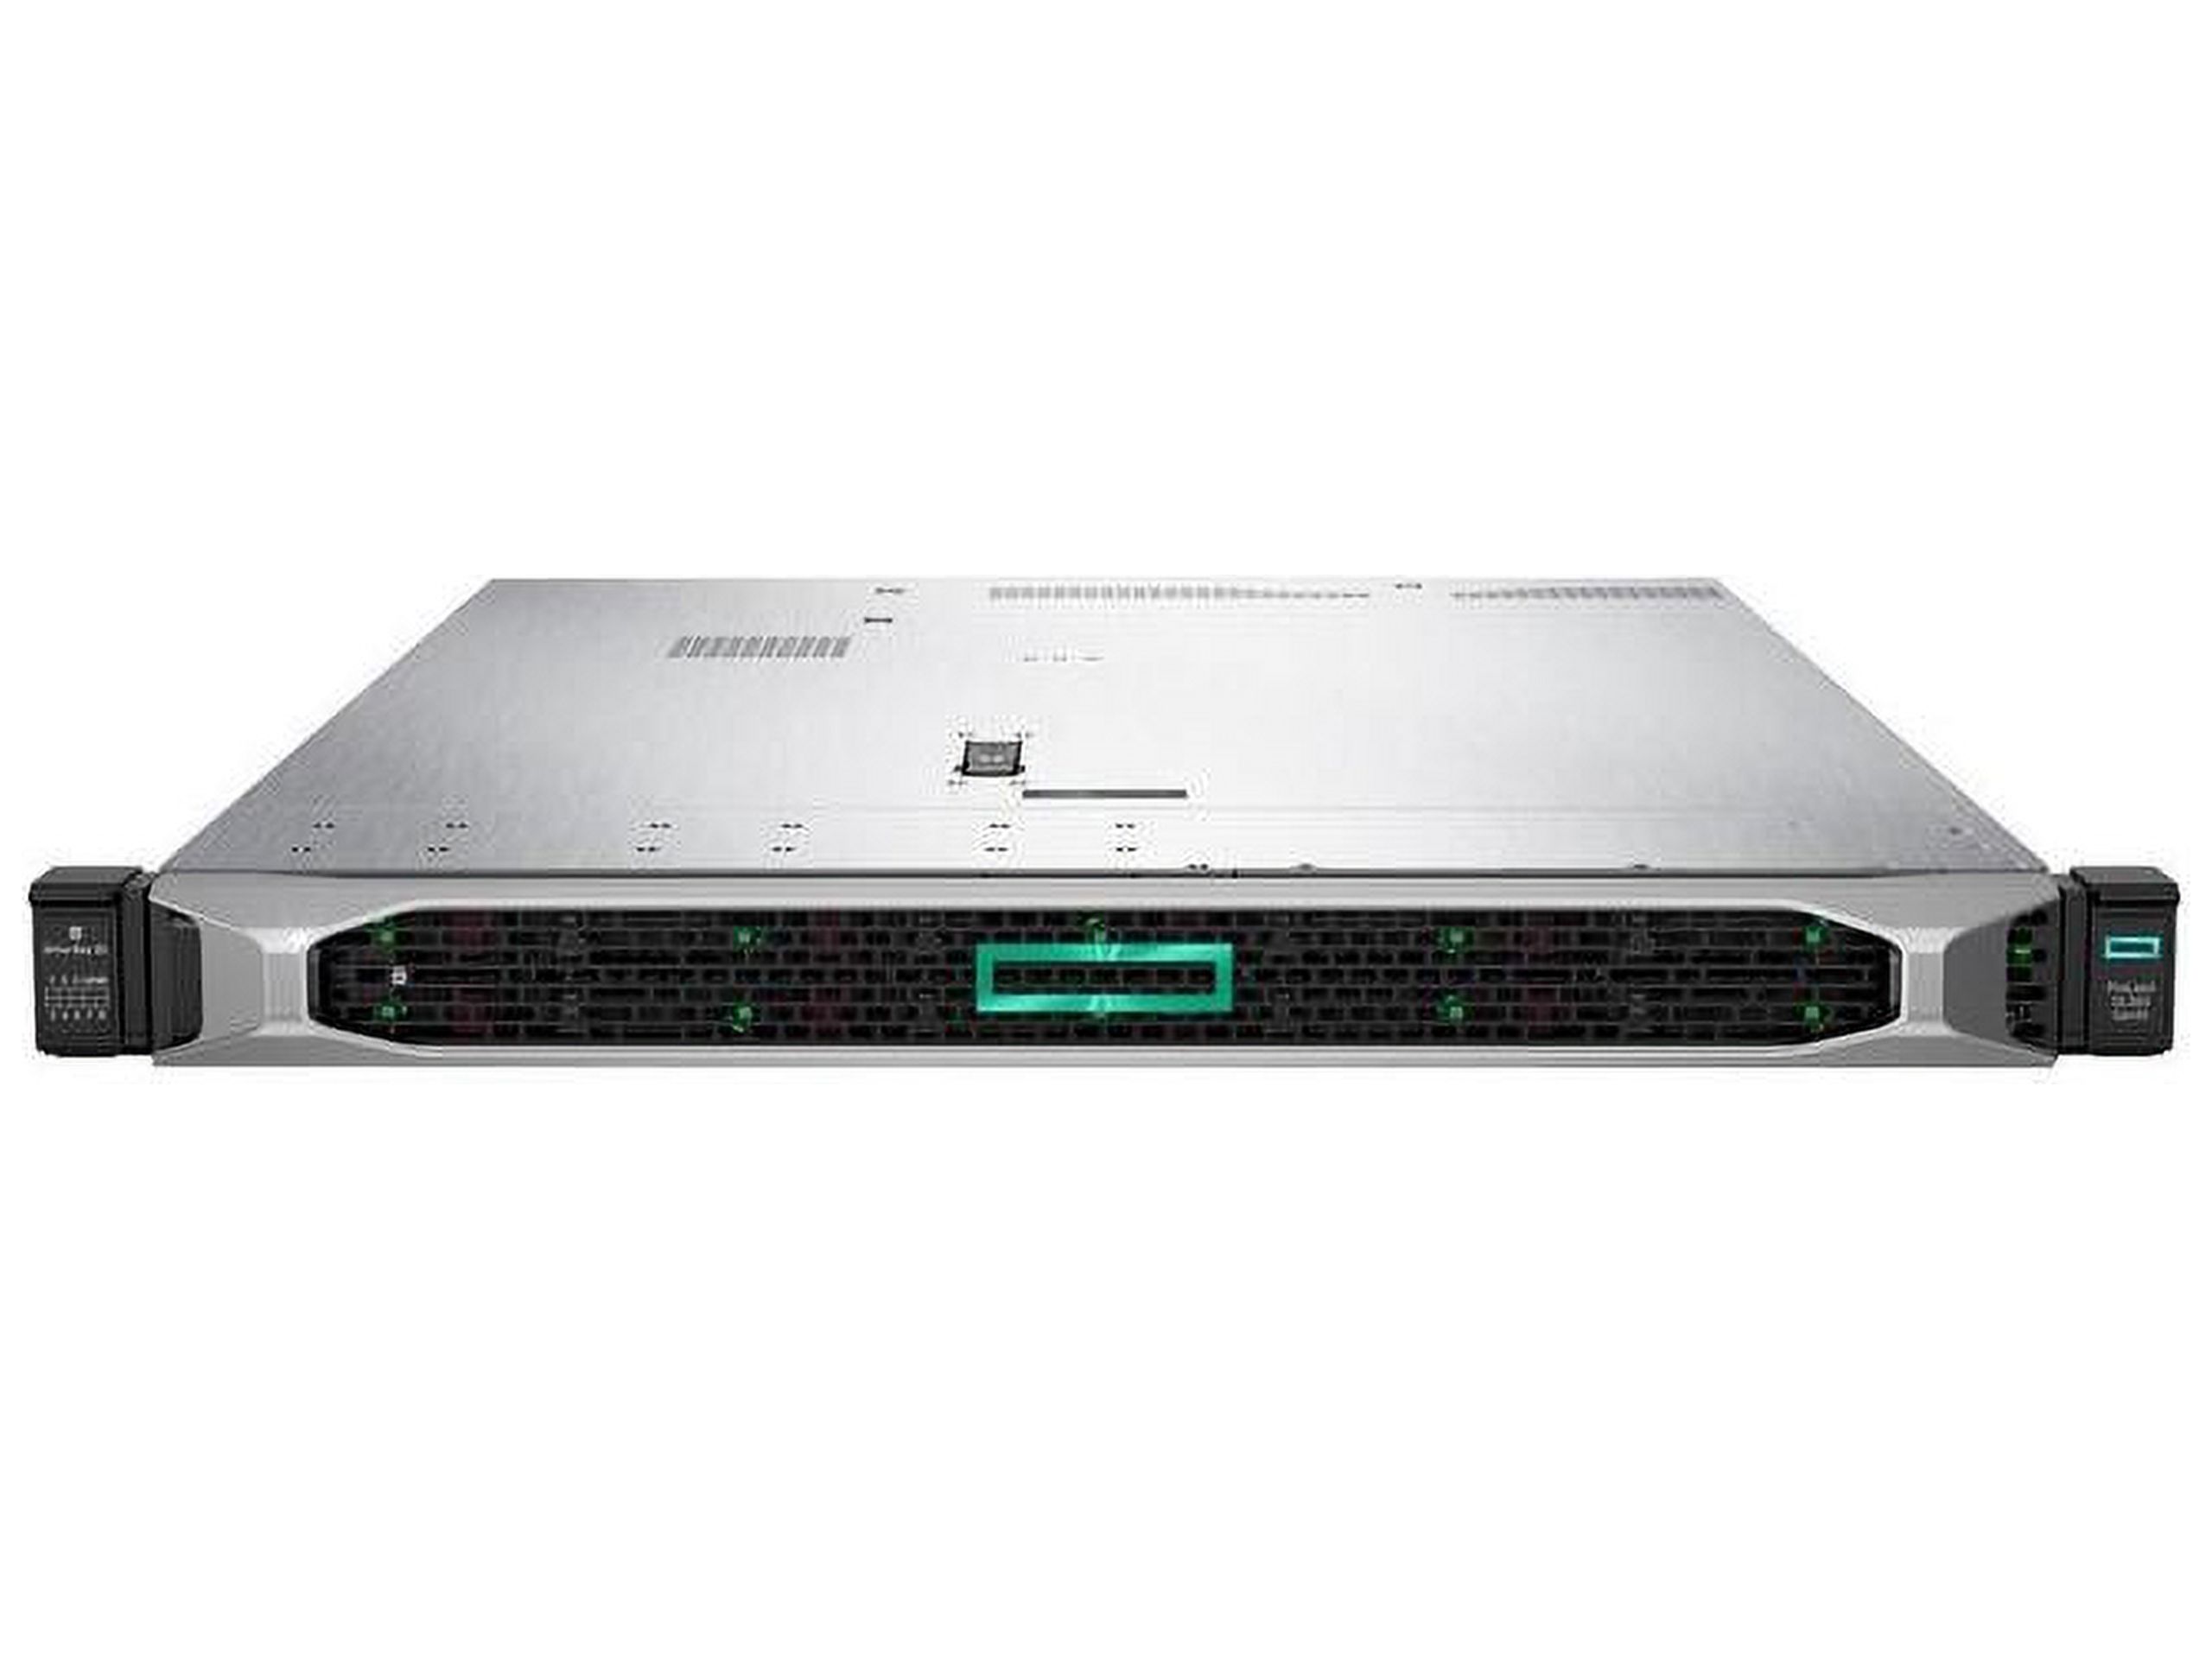 HPE ProLiant DL360 G10 1U Rack Server - 1 x Intel Xeon Silver 4208 2.10 GHz - 32 GB RAM - Serial ATA, 12Gb/s SAS Controller - Intel C621 Chip - 2 Processor Support - 1.54 TB RAM Support - Up to 16 MB - image 1 of 5